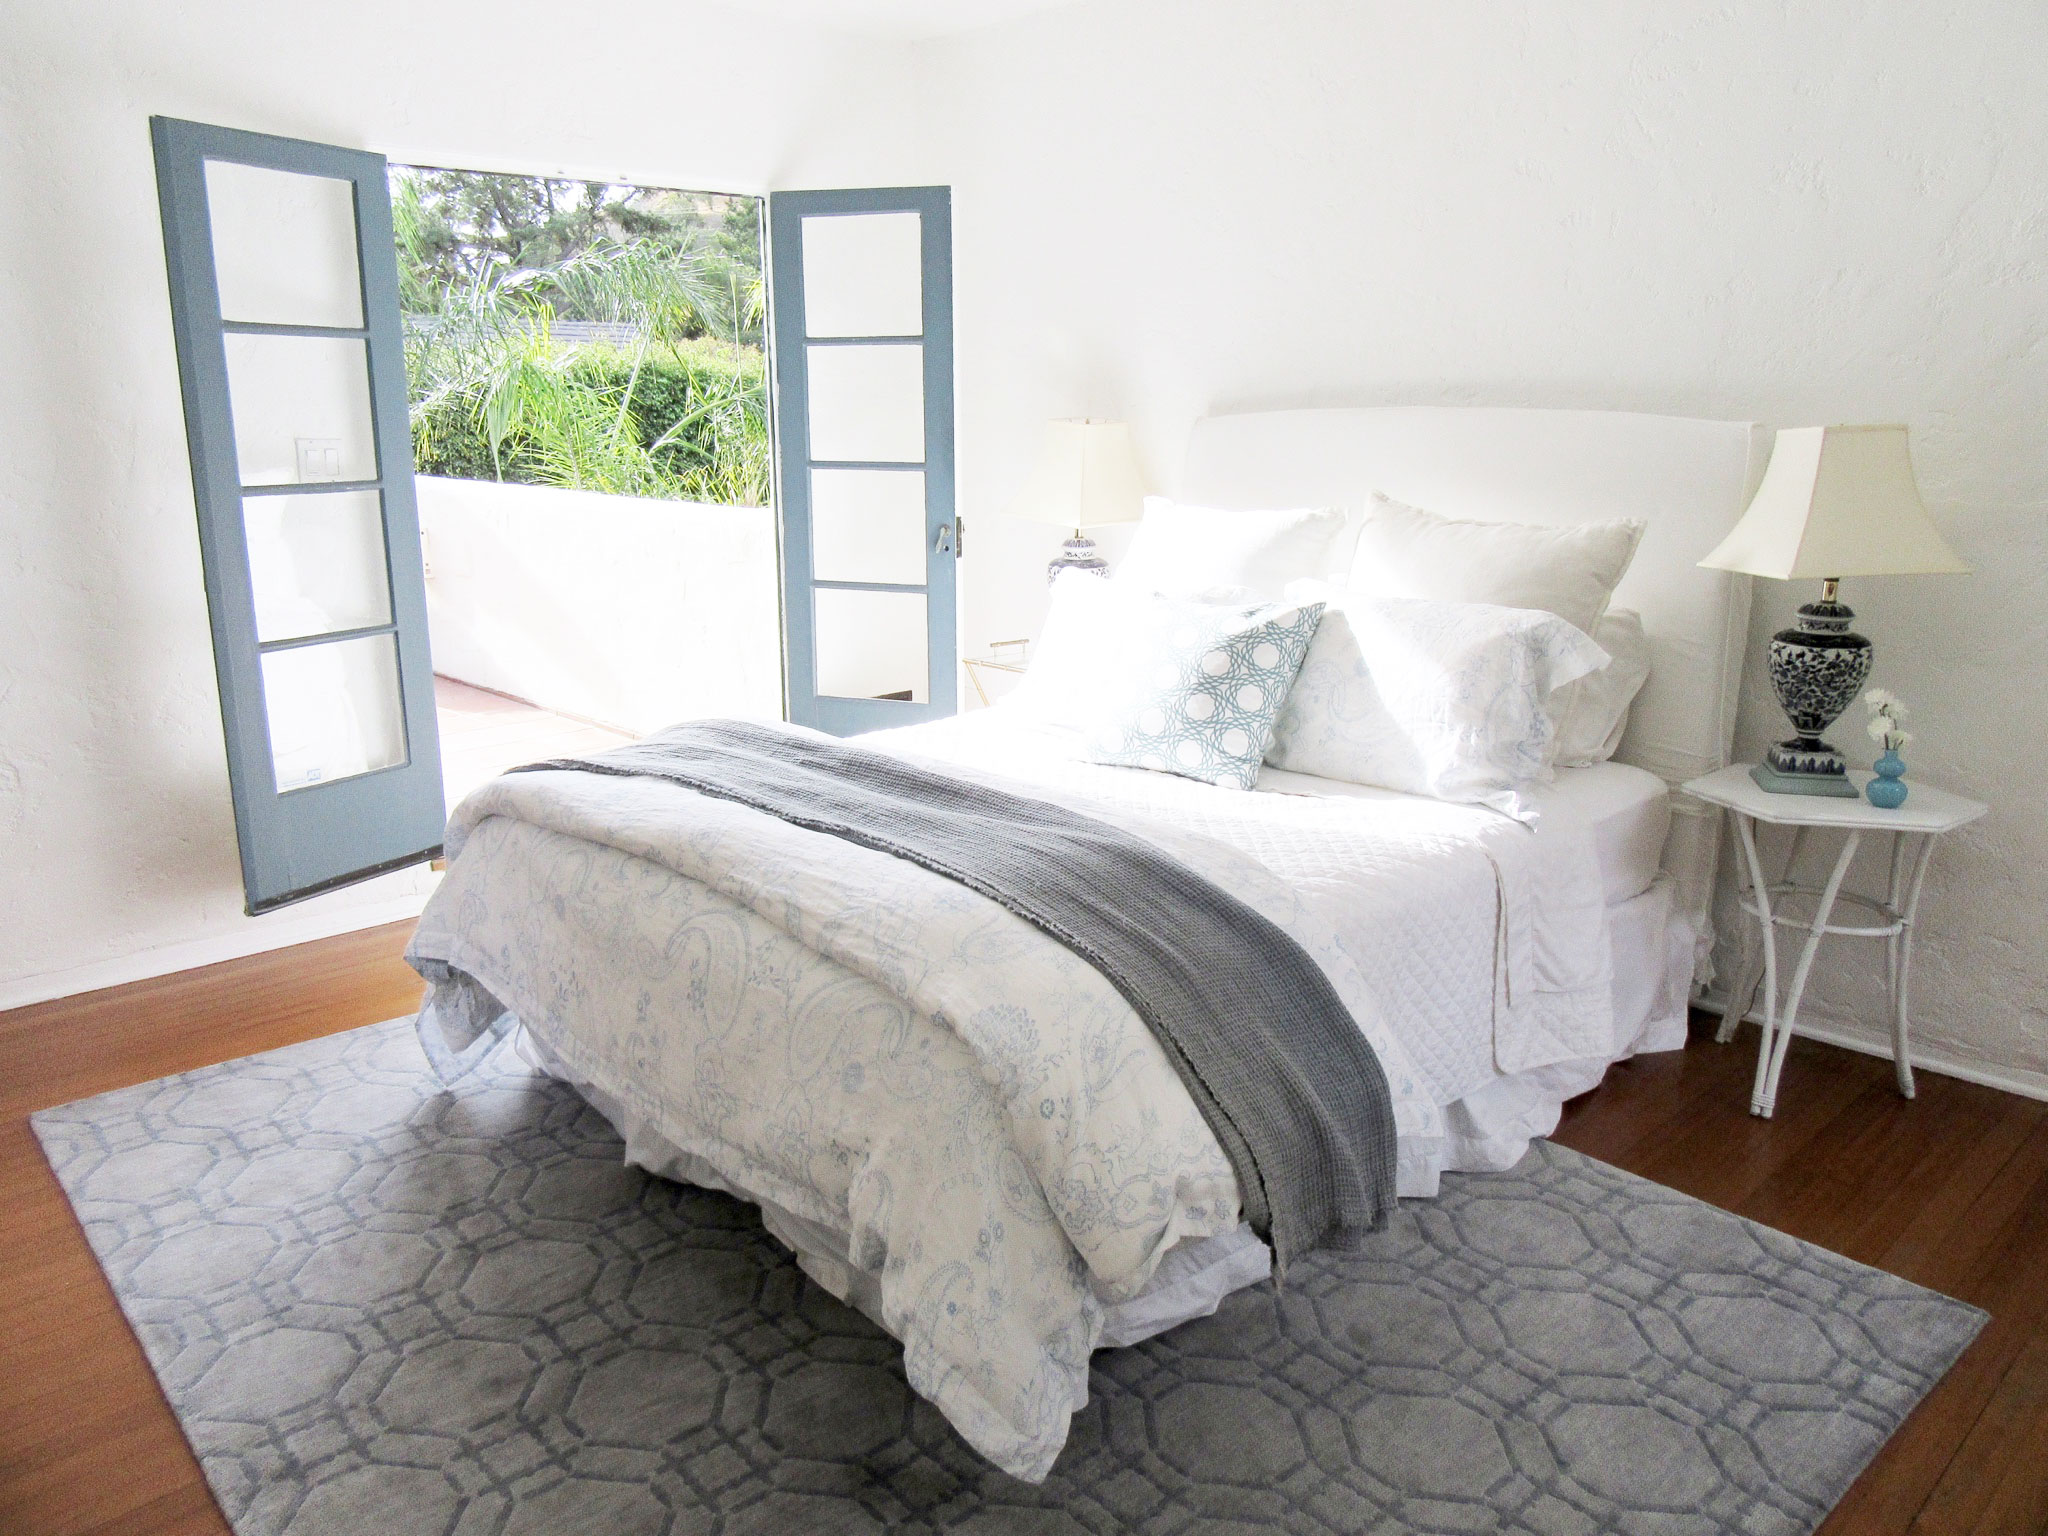 Perfect Patterns: Exploring Stylish Bedroom Rug Ideas For Every Taste